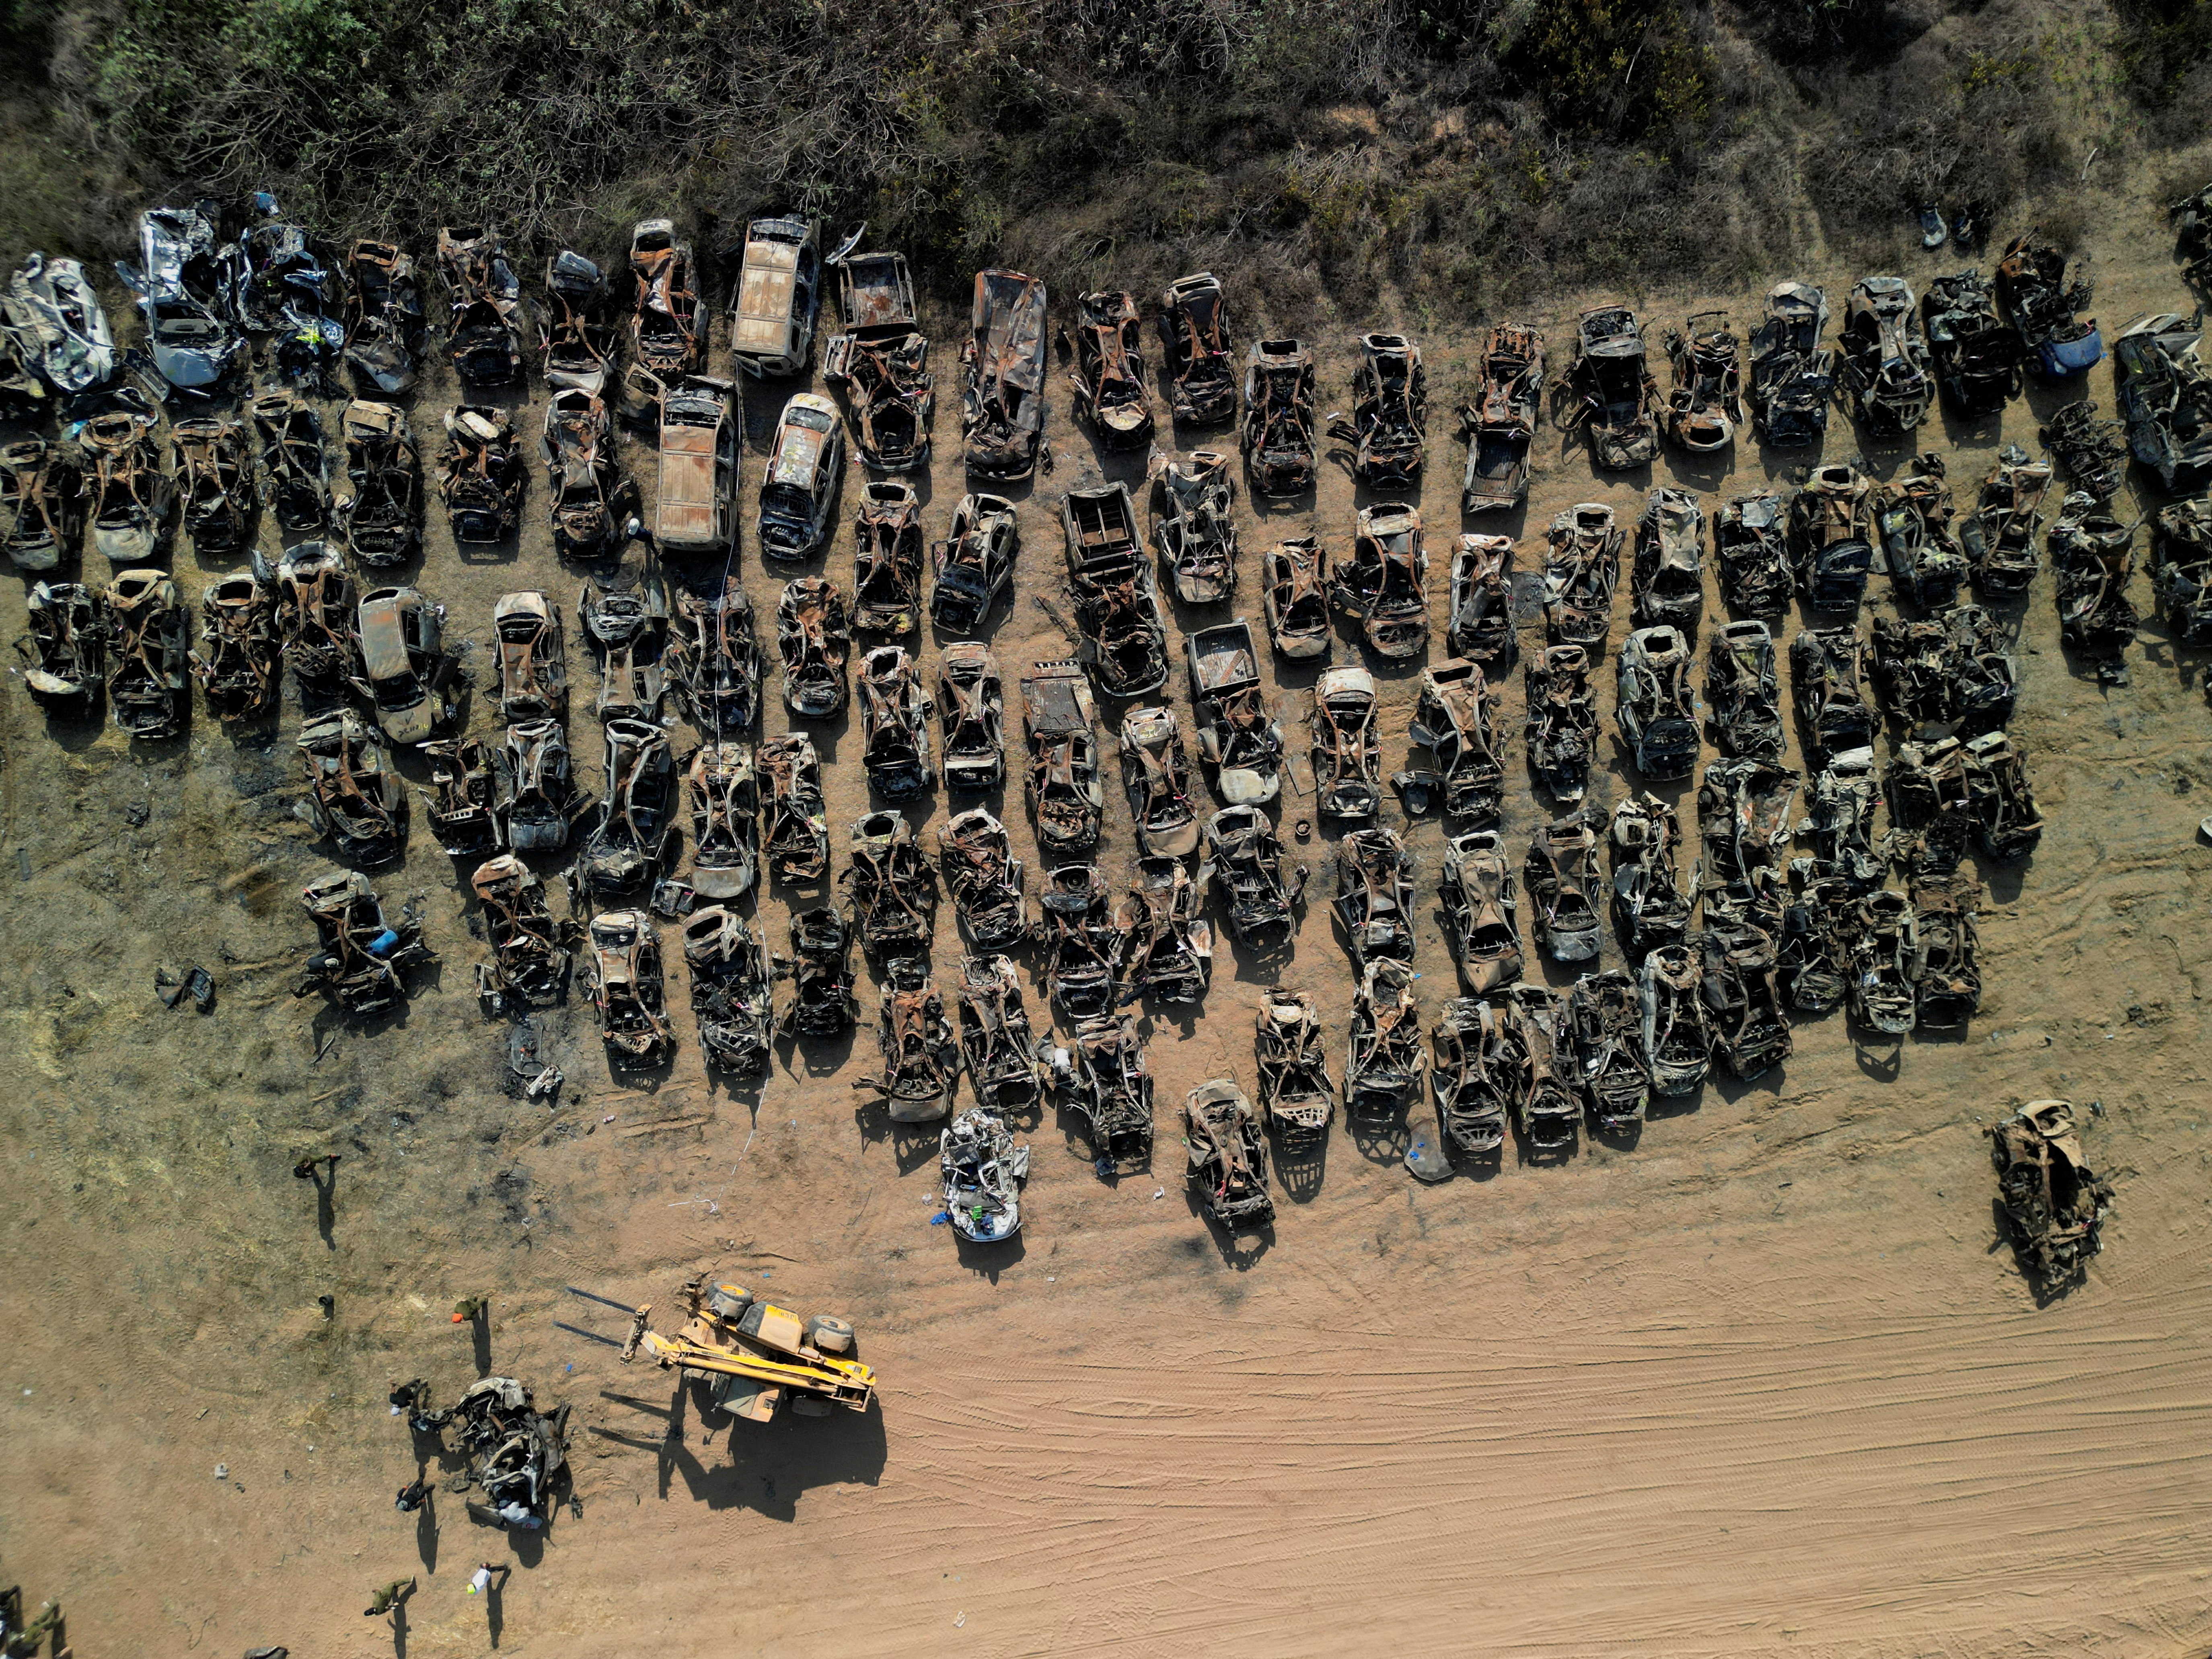 Drone view of a junk yard for Israeli vehicles destroyed in a Hamas attack